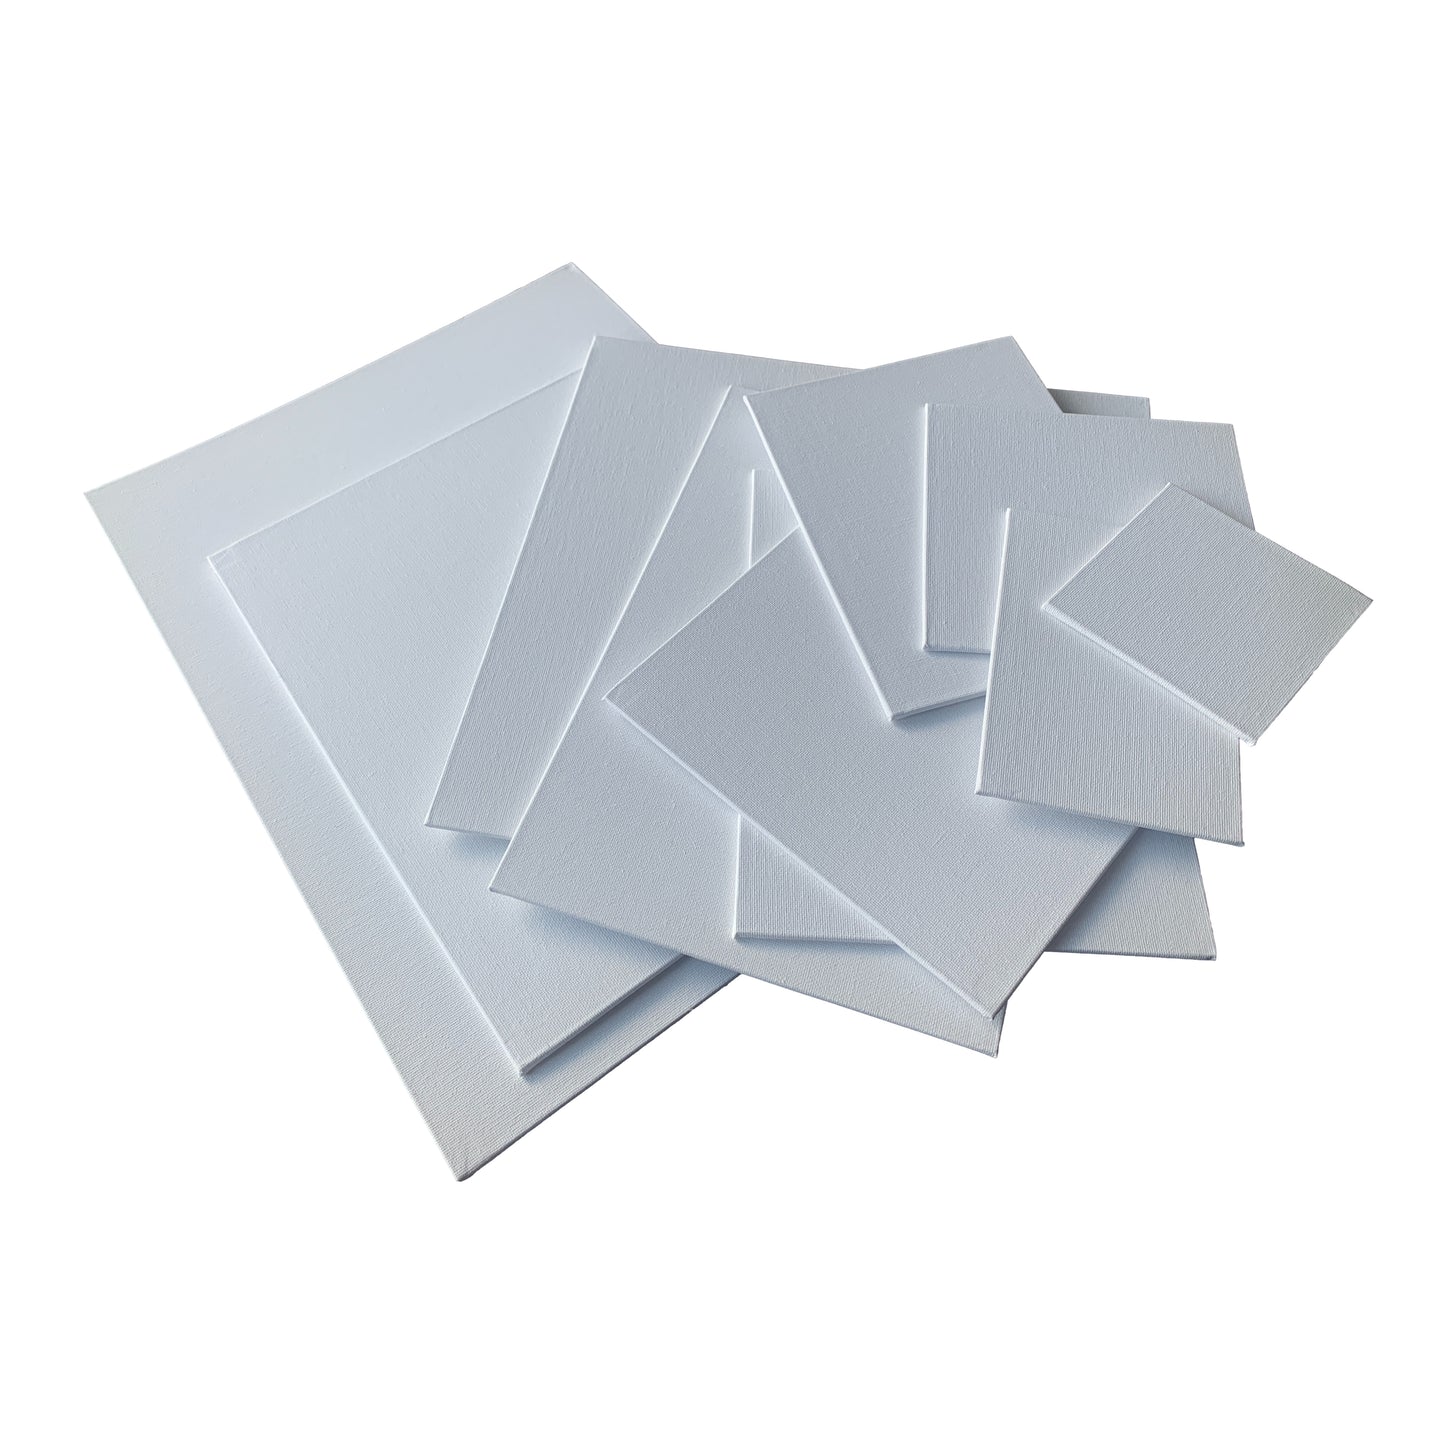 Set of 10 Assorted Sizes Blank White Flat Stretched Board Art Canvas By Janrax